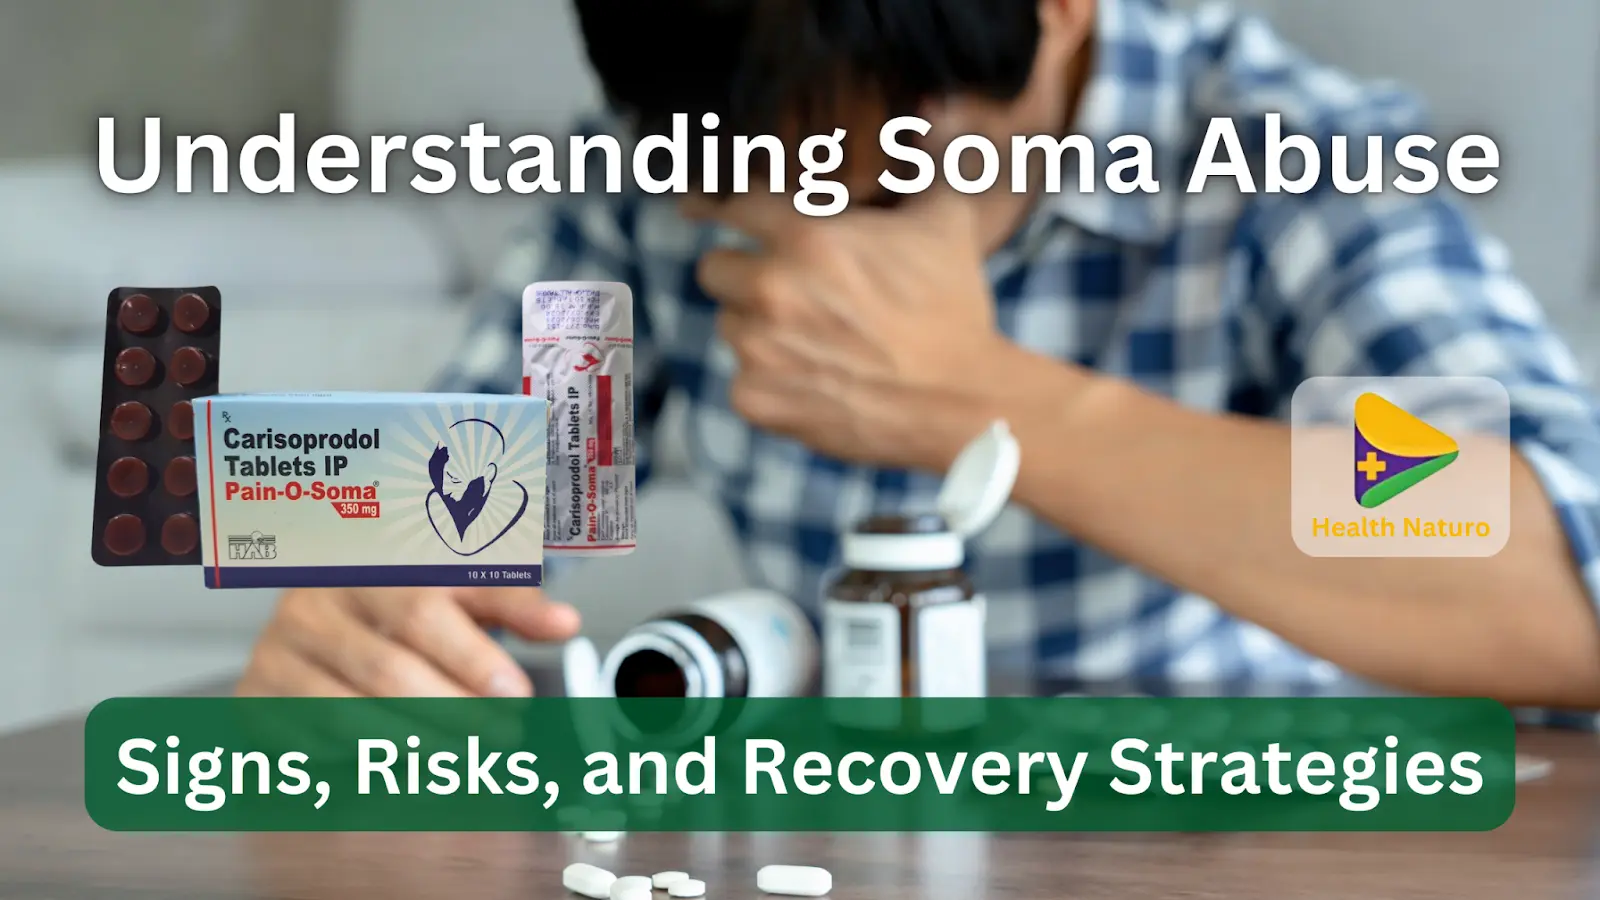 Understanding Soma Abuse: Signs, Risks, and Recovery Strategies